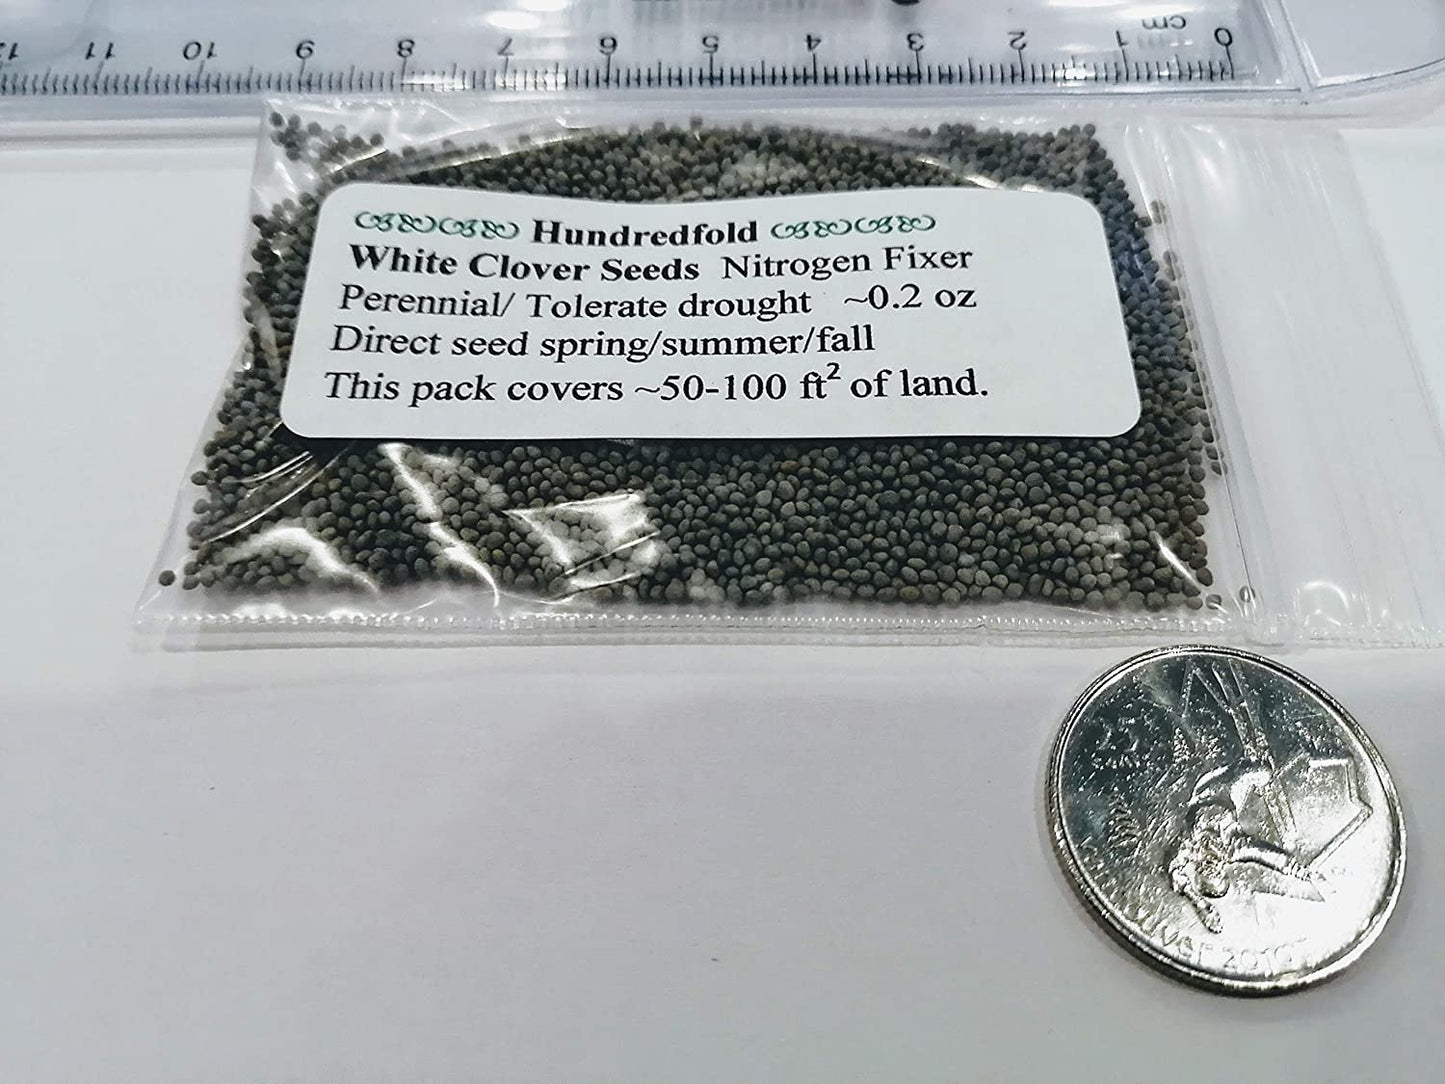 Hundredfold White Dutch Clover Trifolium repens 6 Grams or 0.2 oz Seeds - Perennial Legume Non-GMO Cover Crop, Ground Cover & Bee Plant for Lawn, Garden & Cropland, Shipped in Canada